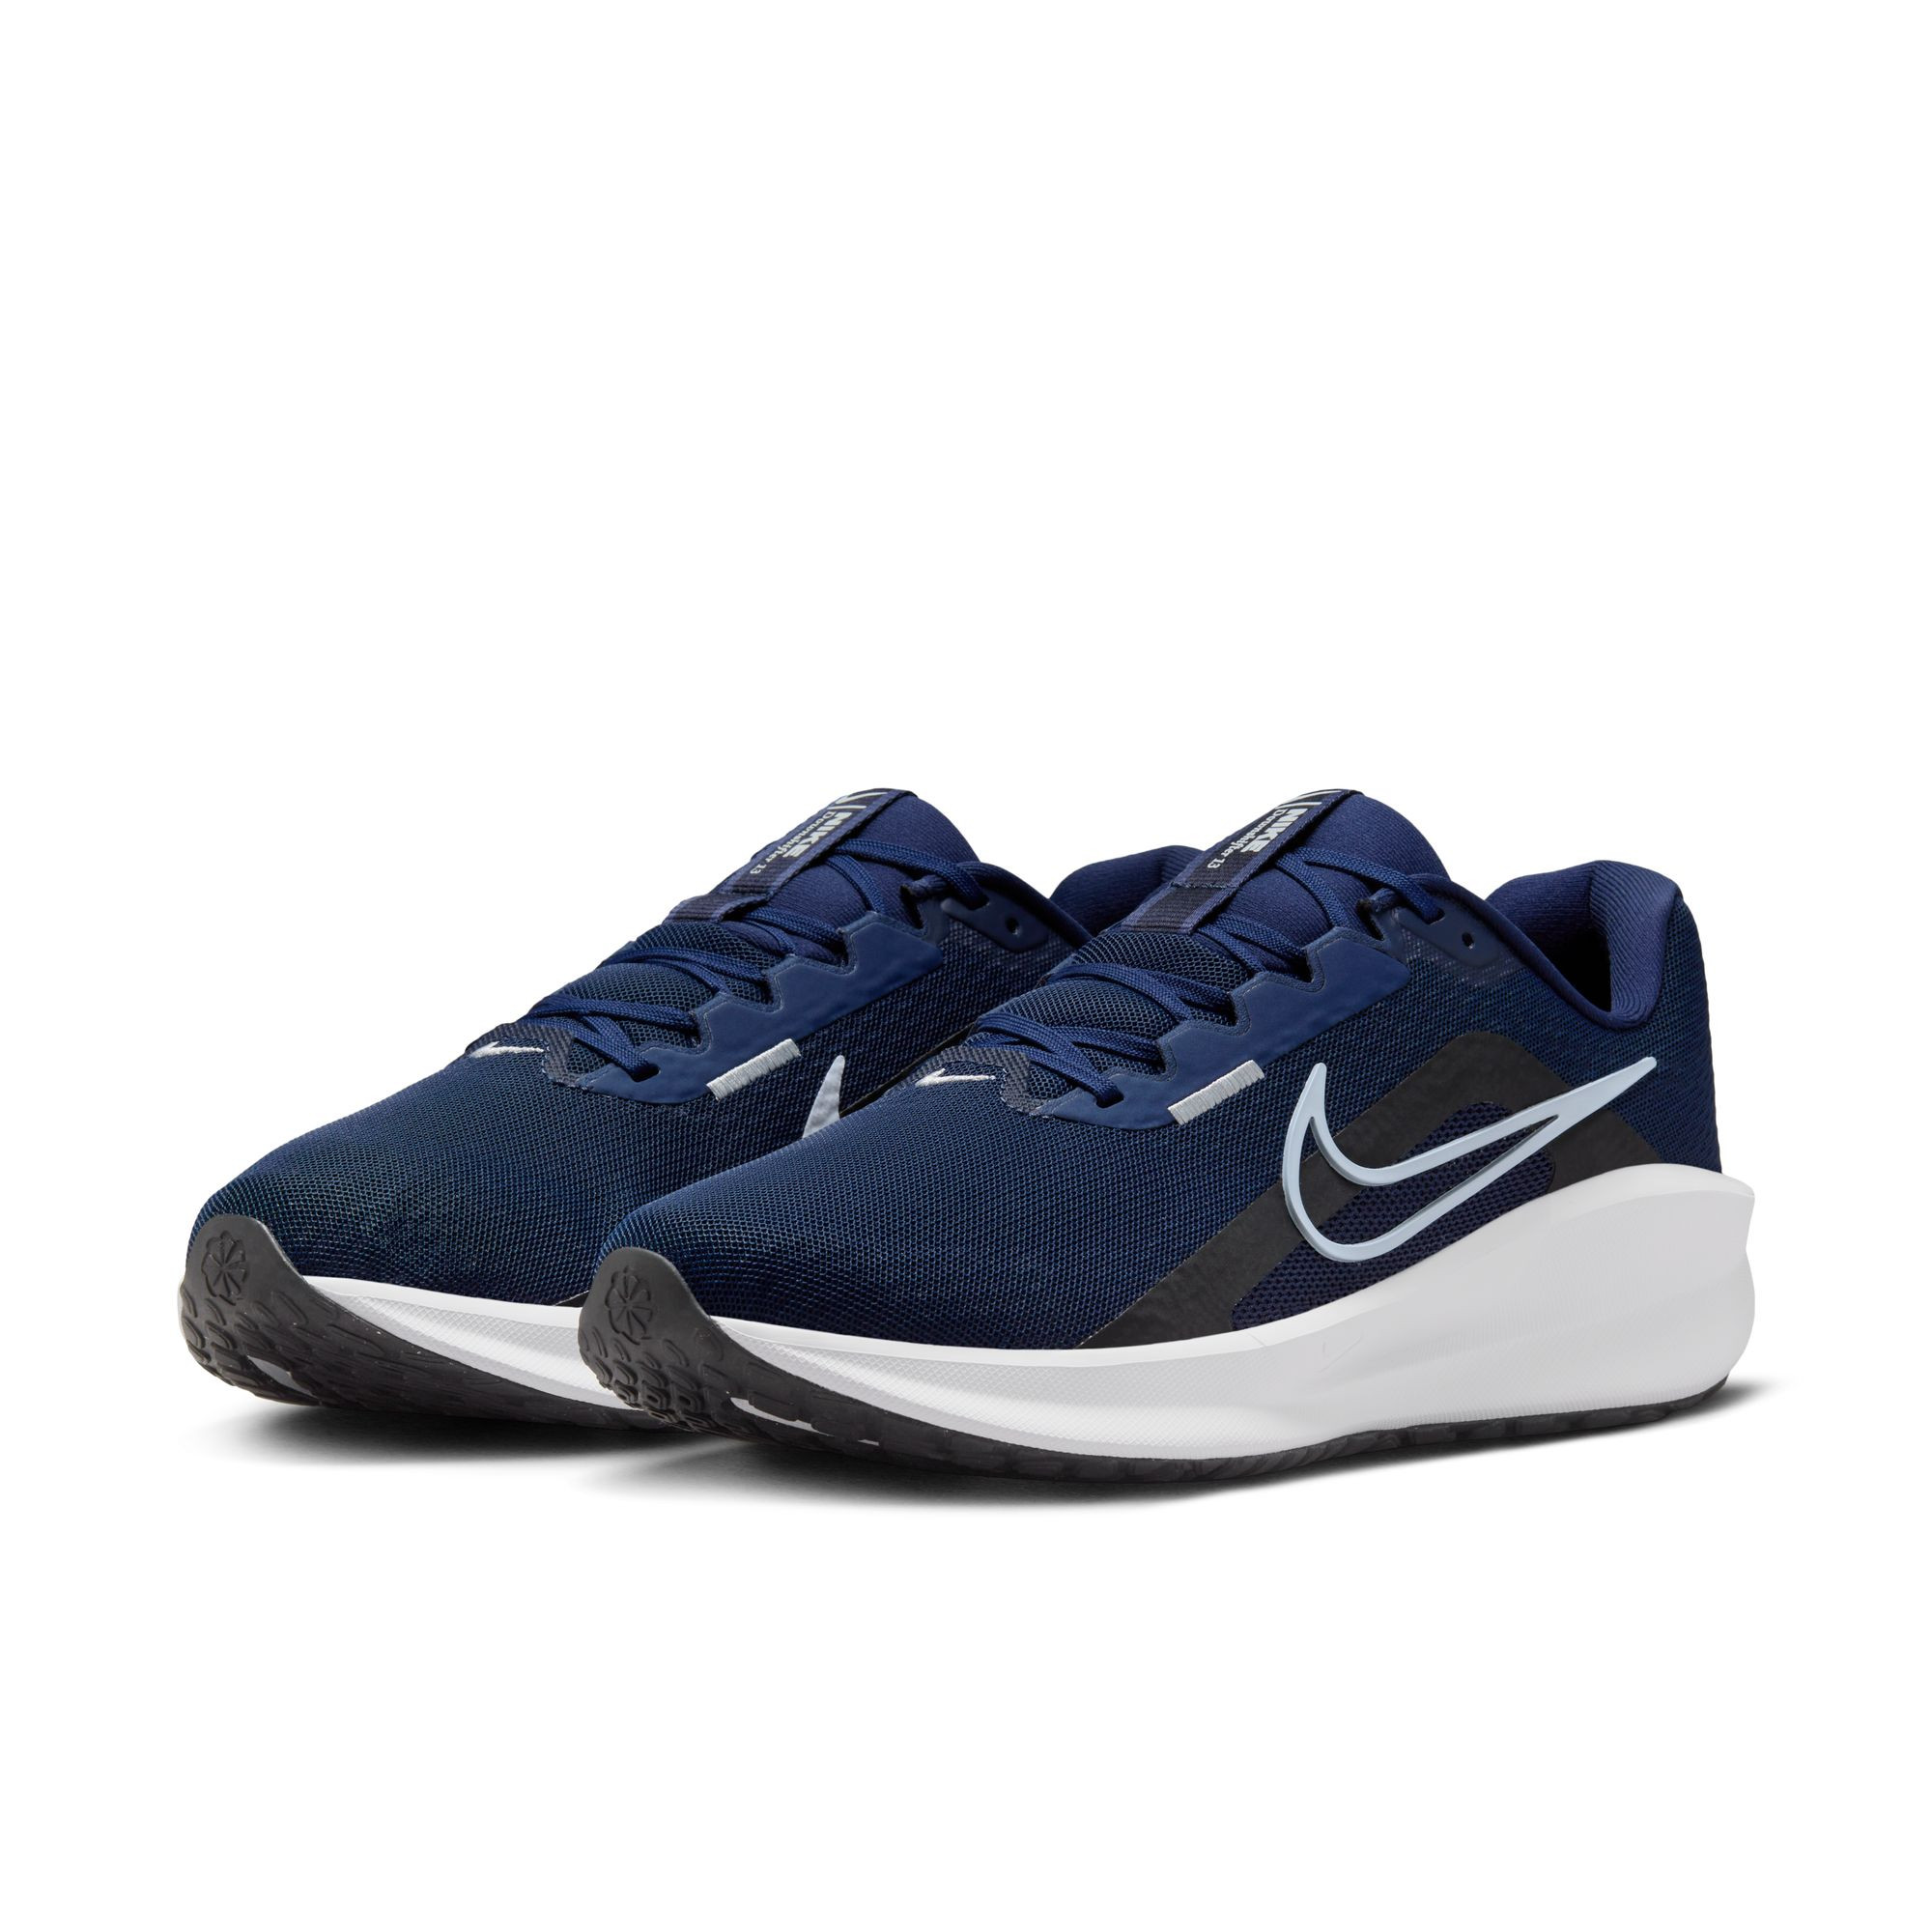 Chaussures de Running Nike Downshifter 13 pour homme - Midnight Navy/Pure Platinum-Black-White - FD6454-400